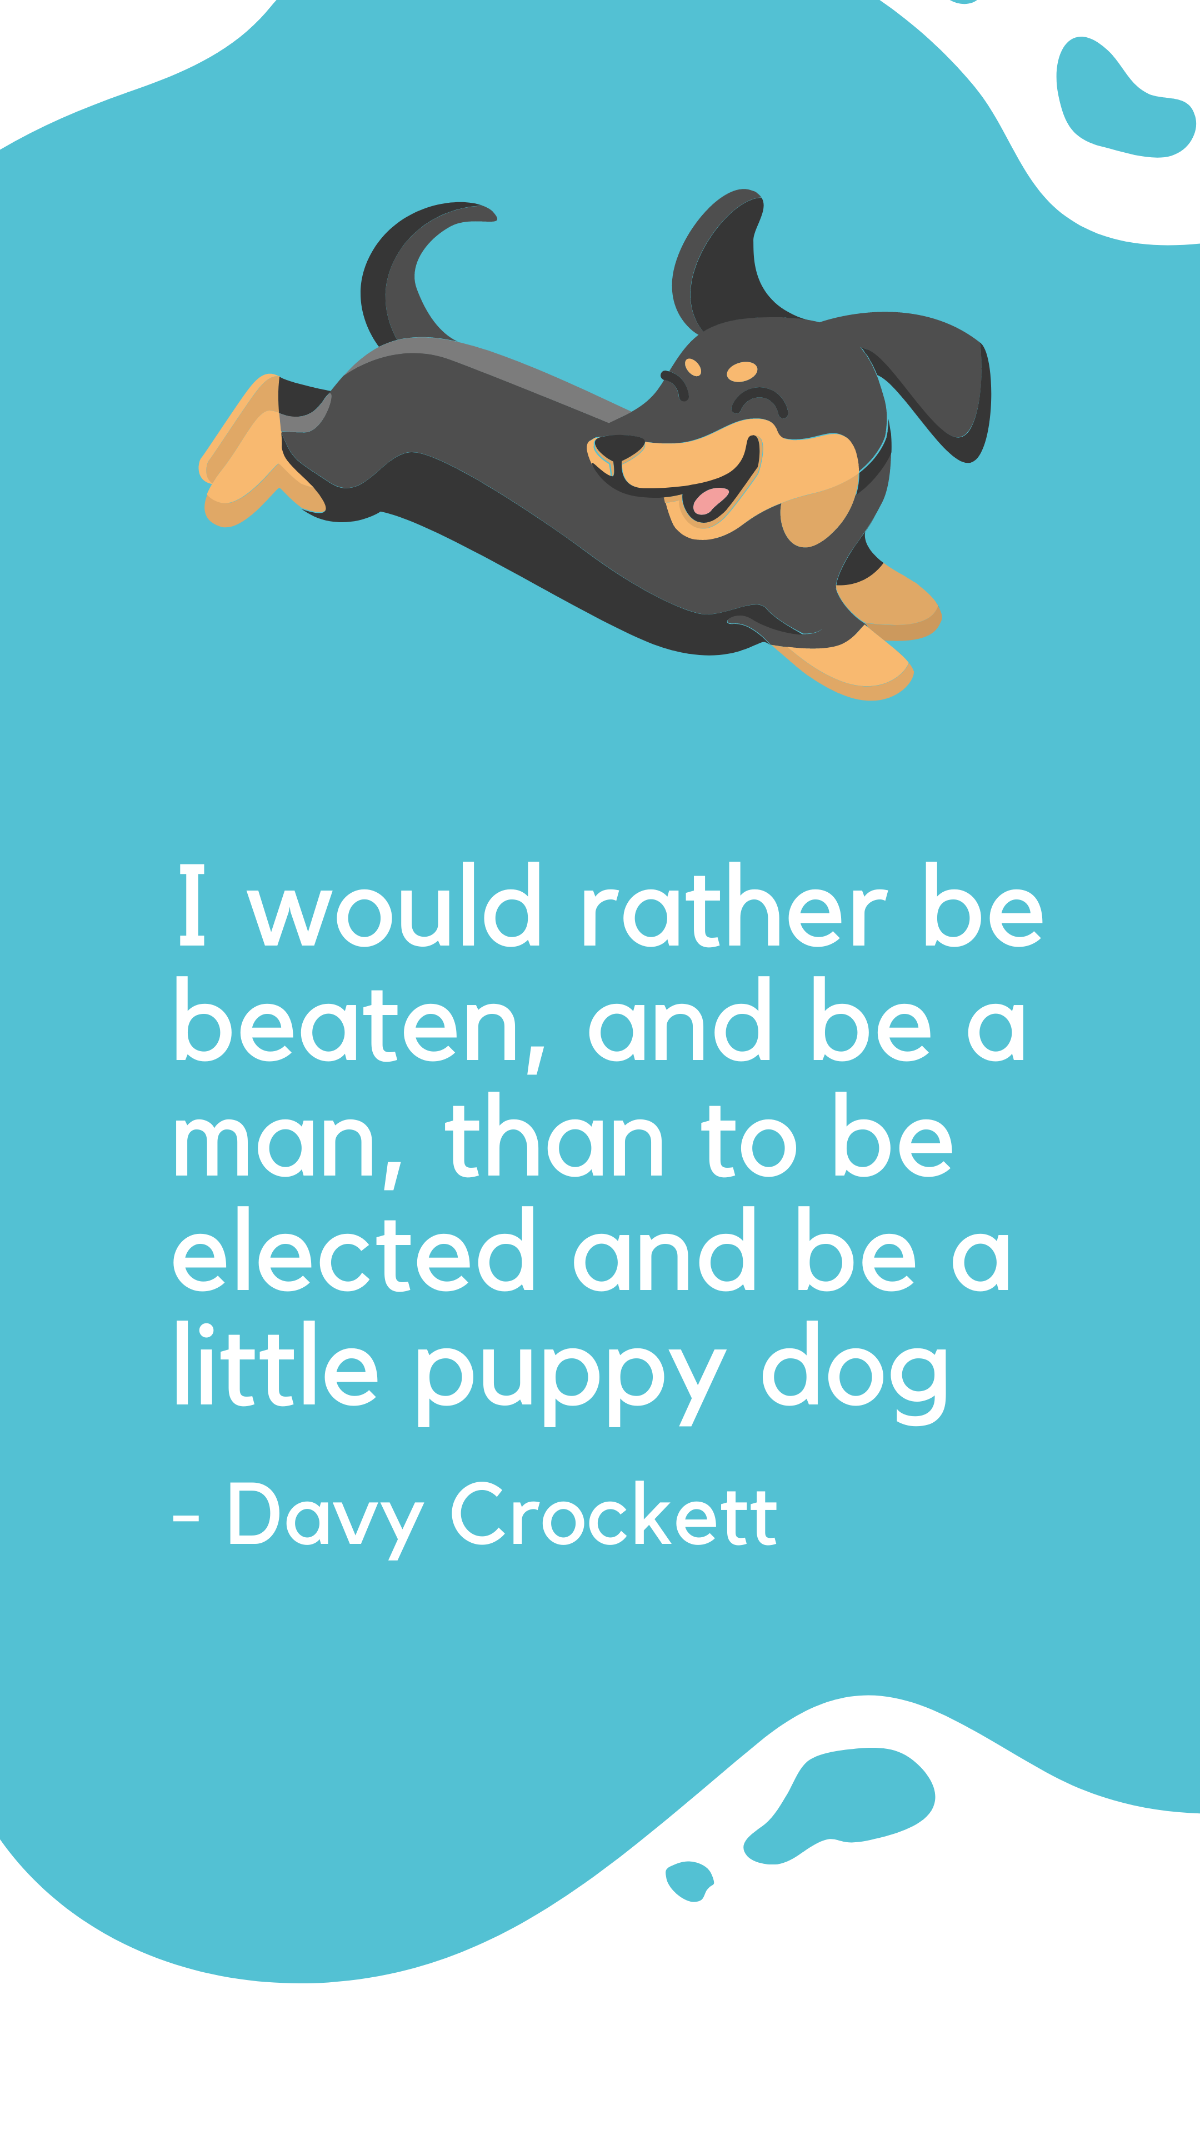 Free Davy Crockett - I would rather be beaten, and be a man, than to be elected and be a little puppy dog Template